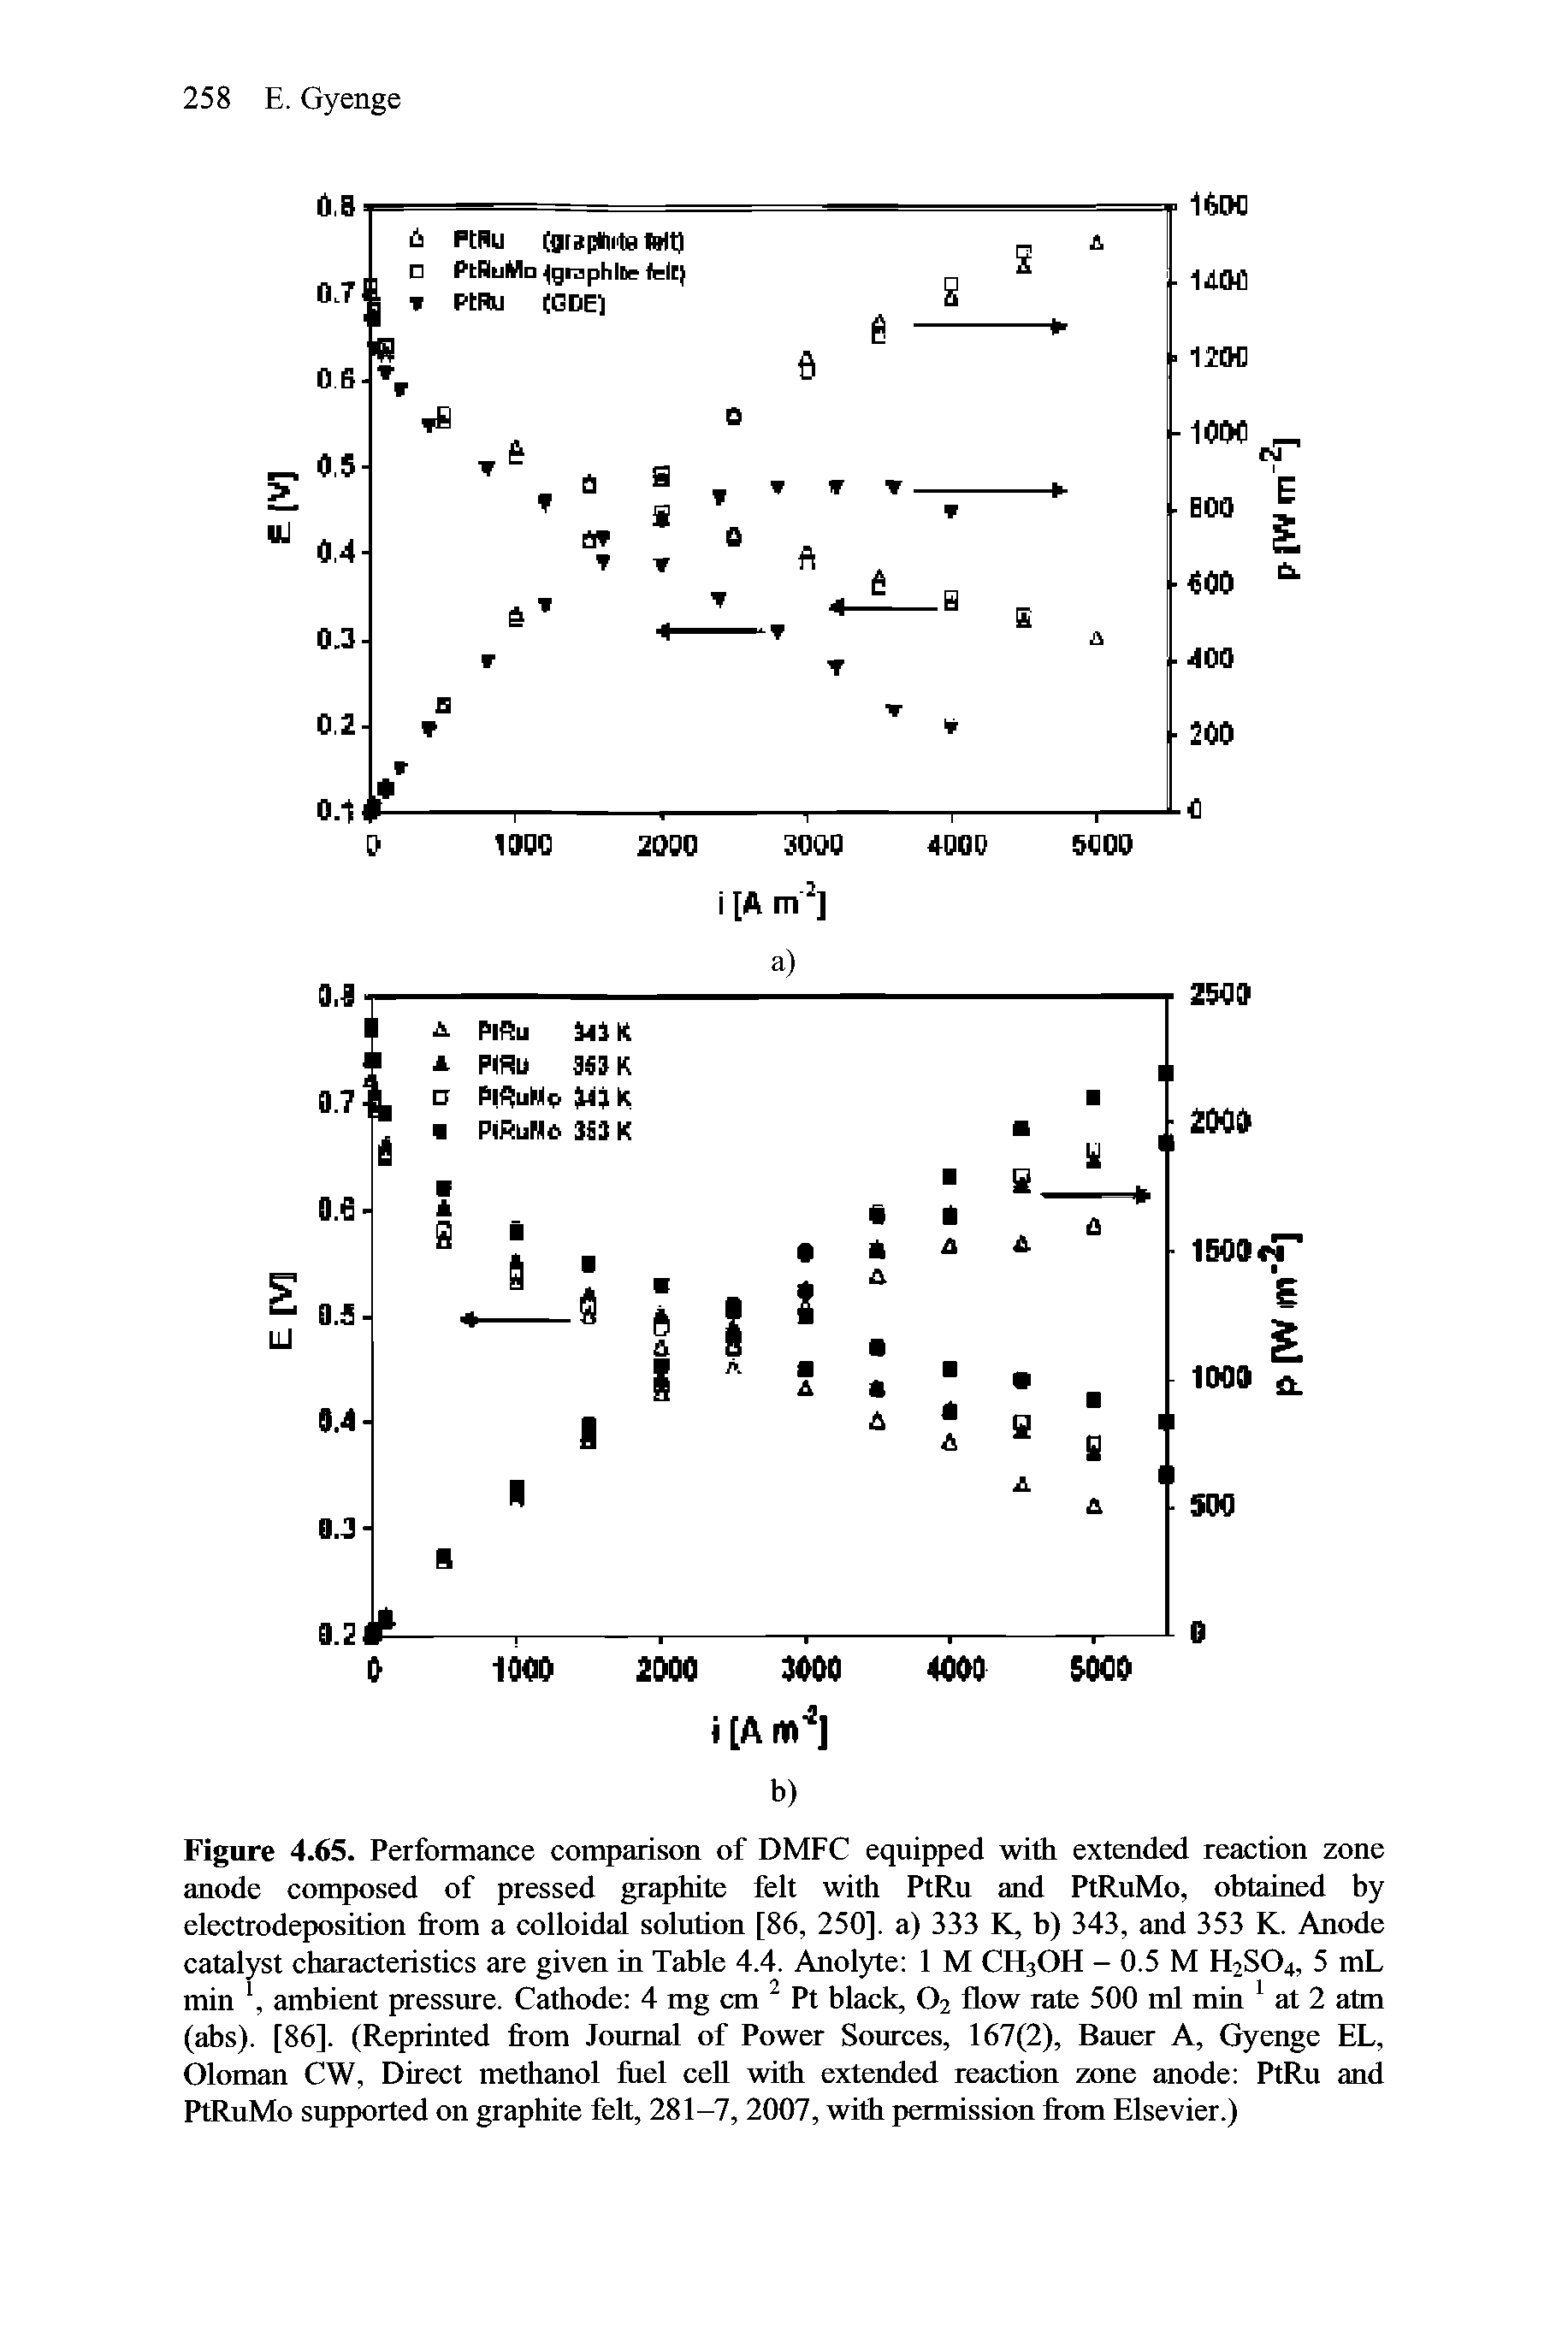 Figure 4.65. Performance comparison of DMFC equipped with extended reaction zone anode composed of pressed graphite felt with PtRu and PtRuMo, obtained by electrodeposition from a colloidal solution [86, 250], a) 333 K, b) 343, and 353 K. Anode catalyst characteristics are given in Table 4.4. Anolyte 1 M CH3OH - 0.5 M H2SO4, 5 mL min, ambient pressure. Cathode 4 mg cm Pt black, O2 flow rate 500 nil min at 2 atm (abs). [86]. (Reprinted from Journal of Power Sources, 167(2), Bauer A, Gyenge EL, Oloman CW, Direct methanol fuel cell with extended reaction zone anode PtRu and PtRuMo supported on graphite felt, 281-7, 2007, with permission from Elsevier.)...